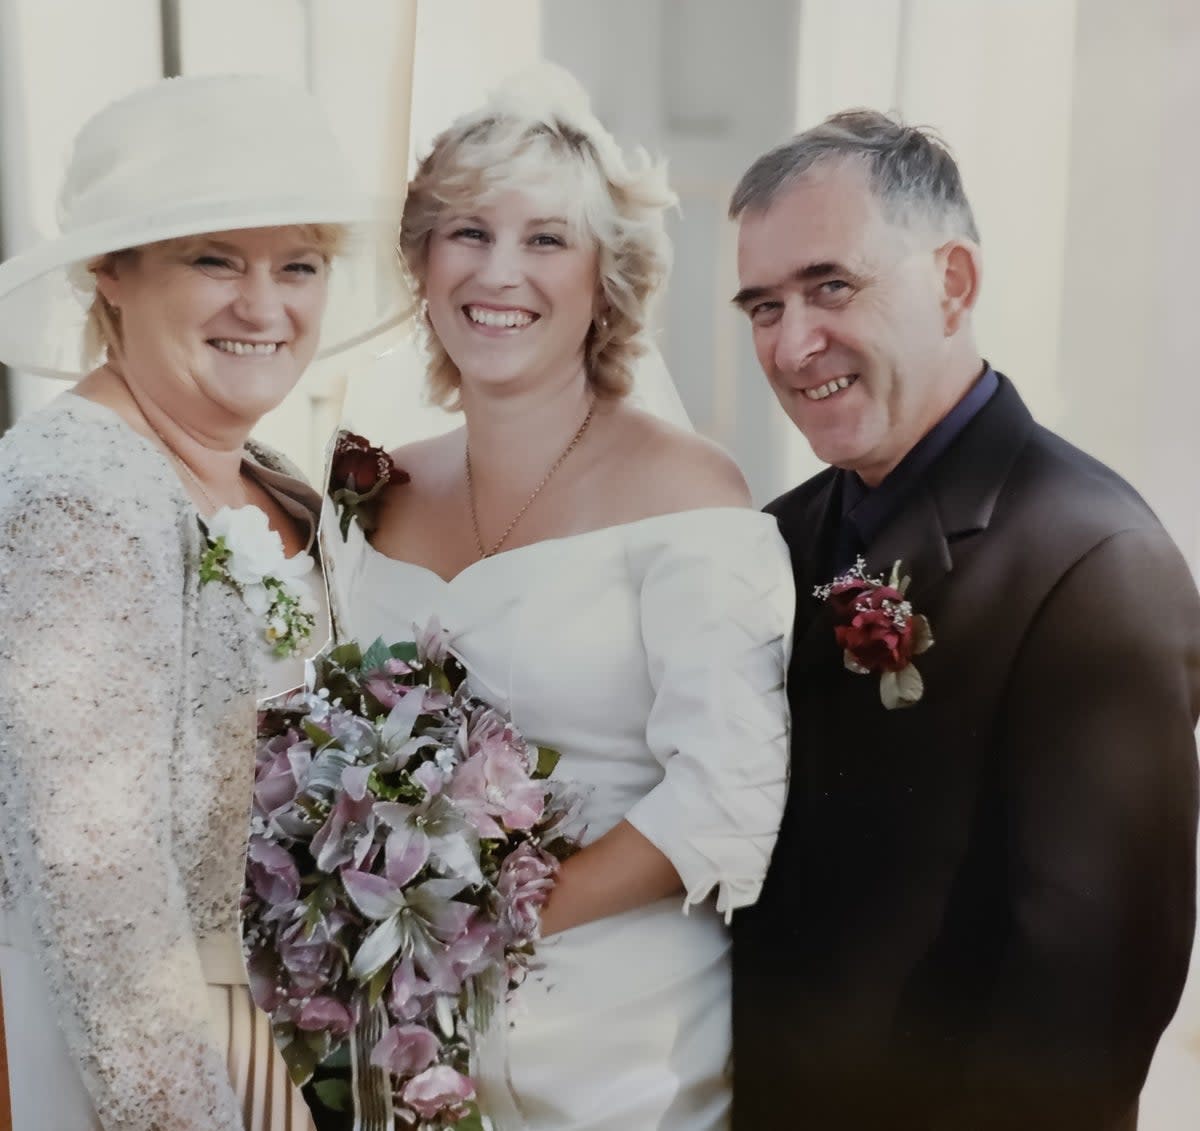 Keith Smith with his wife Carolann Smith, and his daughter Karen on her wedding day in 2000 (Supplied)